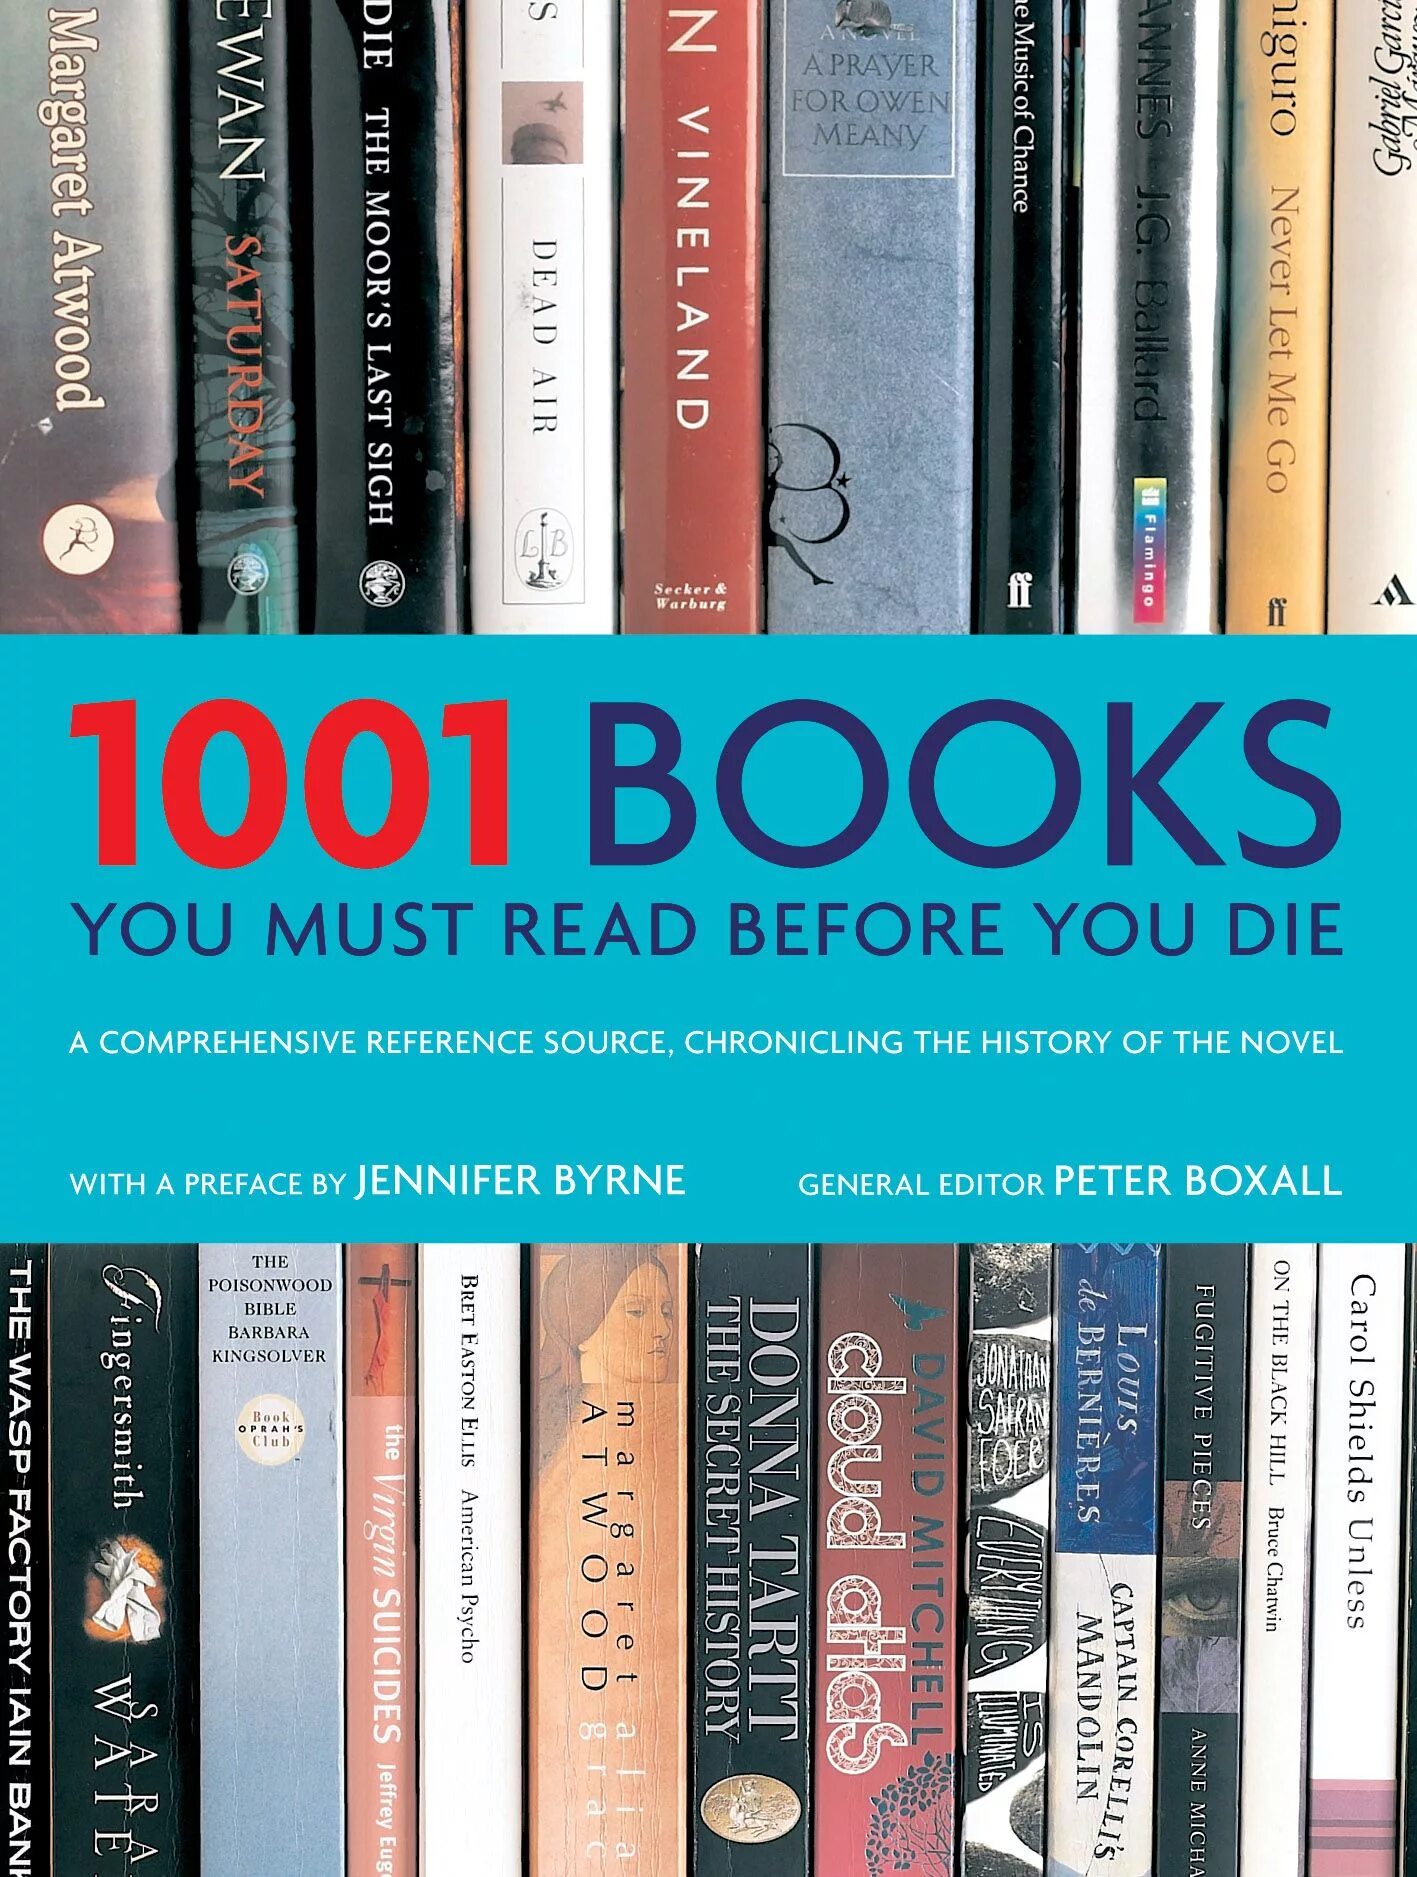 1001 Books you must read before you die. Must read книги. Books you must read. 1001 Книга которую нужно прочитать. Have all books been read